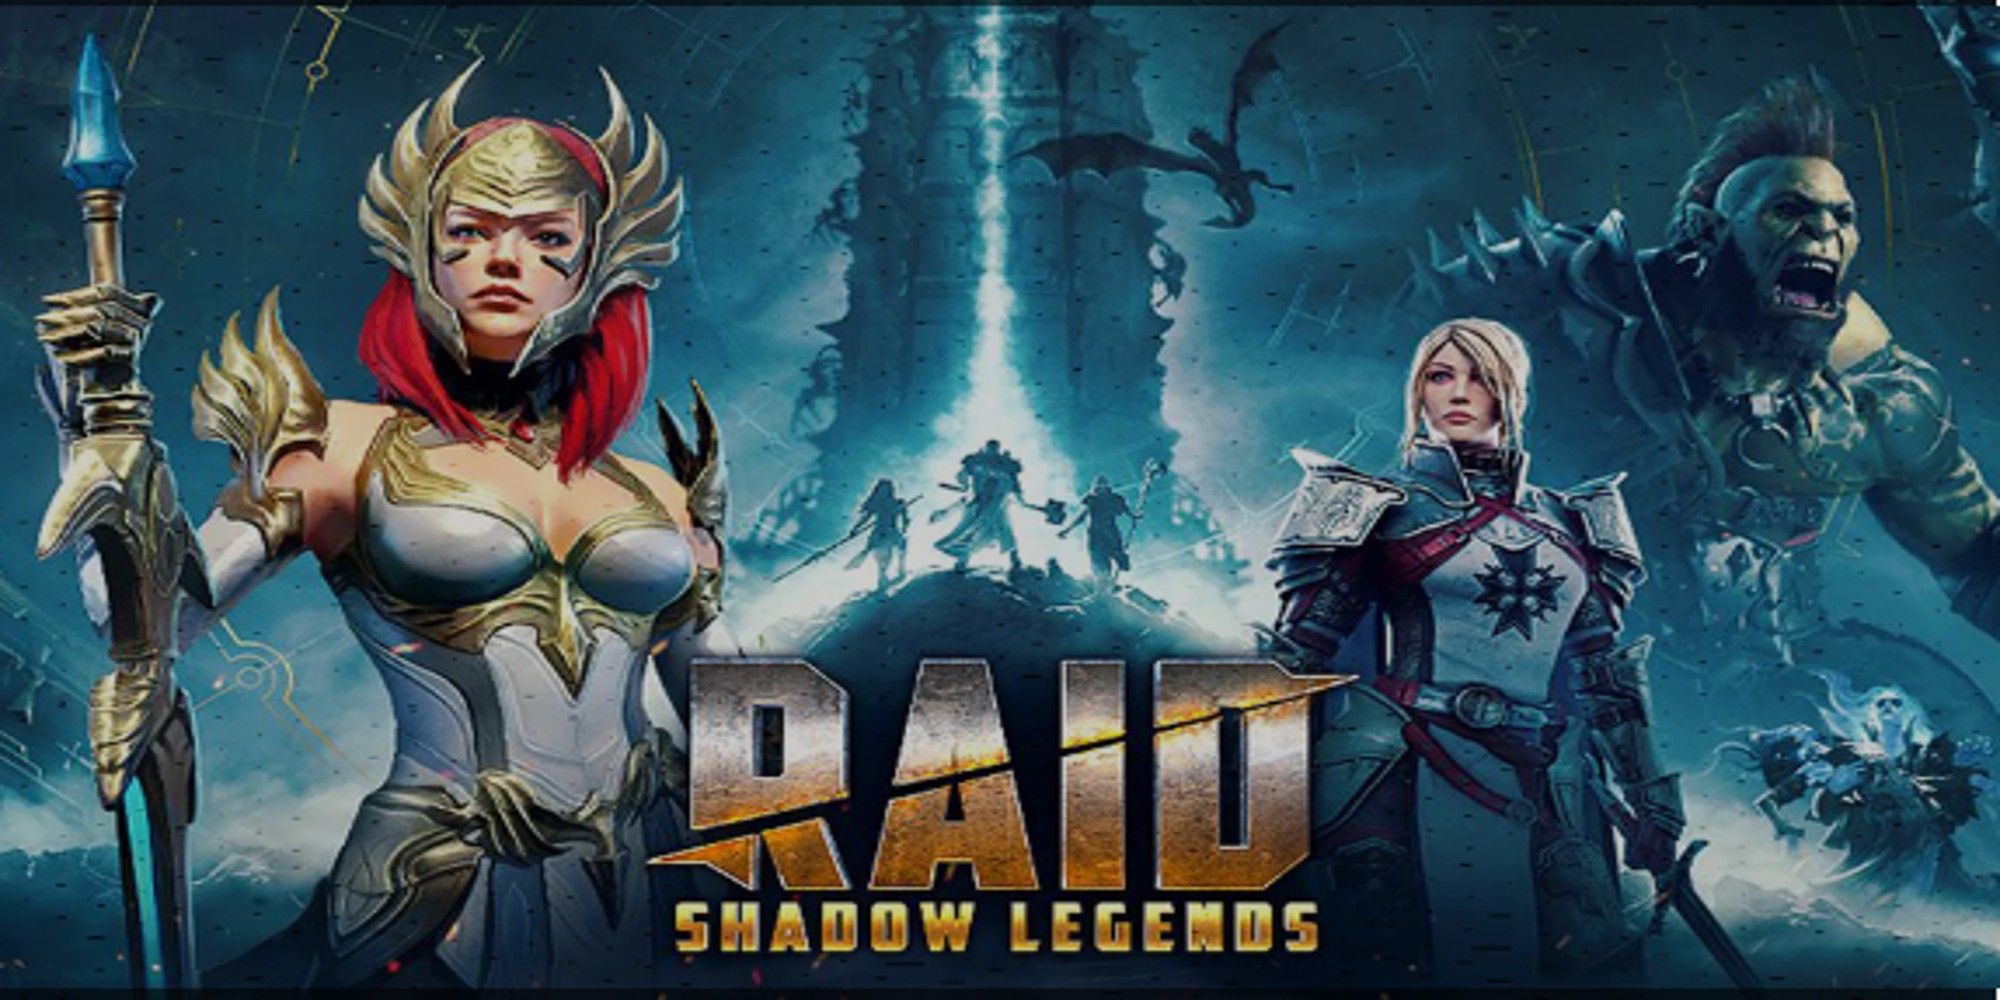 Promotiona art of Raid Shadow Legends showing some characters at front and in the background.